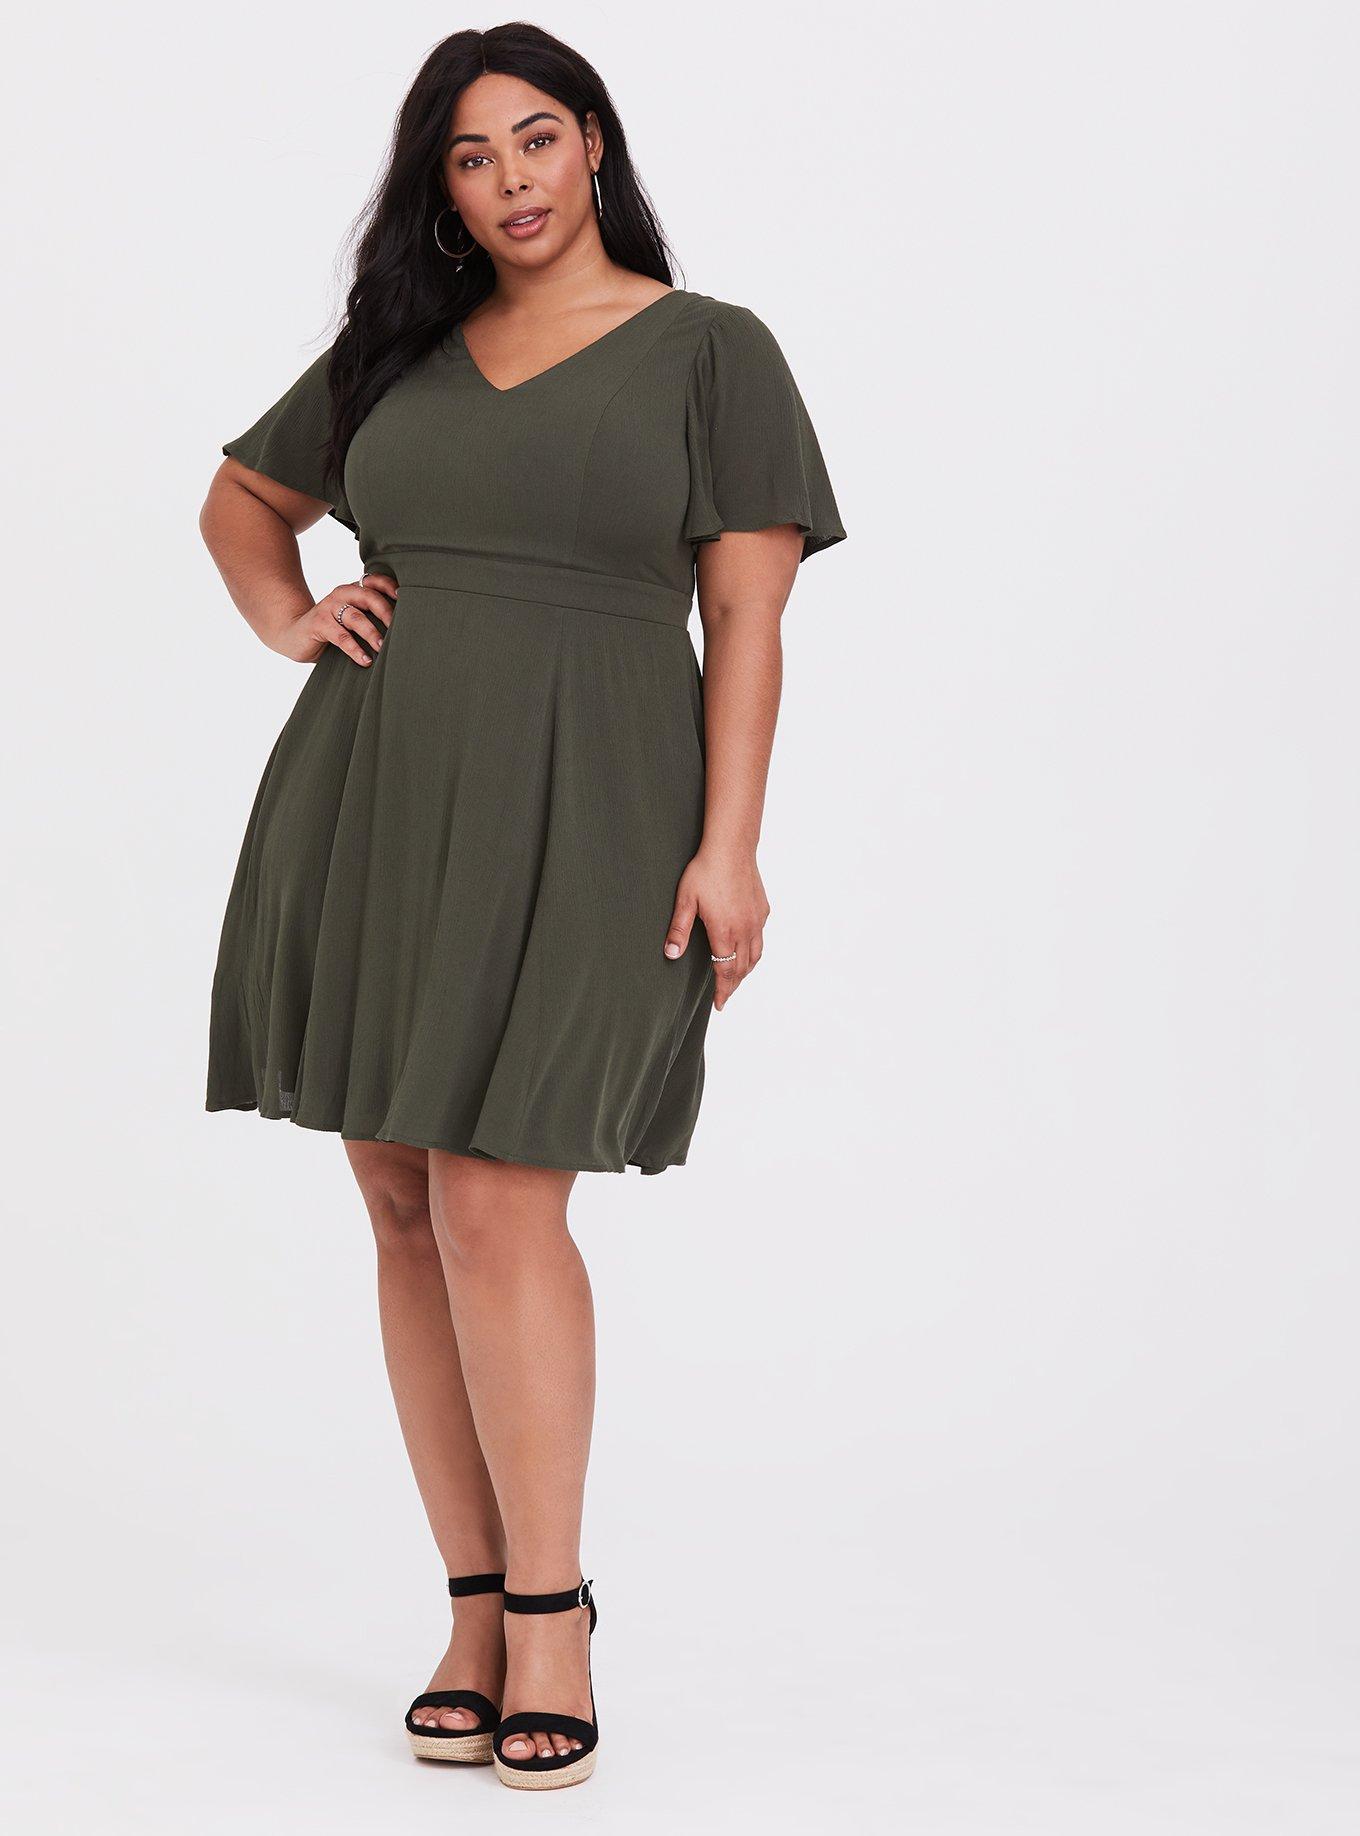 Torrid Haul, Plus Size Tops and Jackets